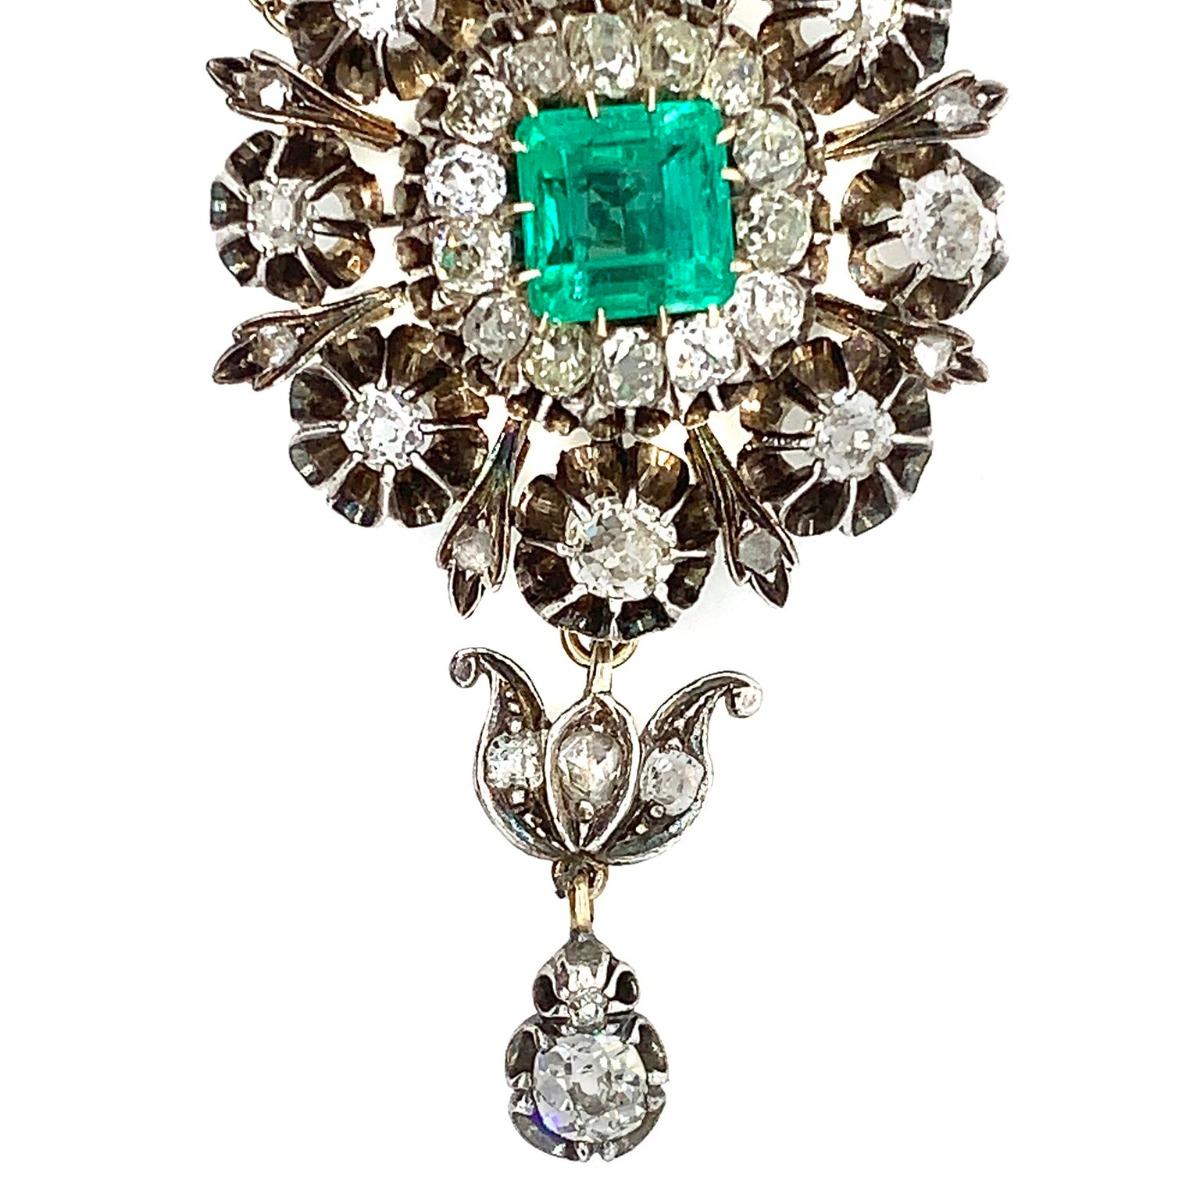 Edwardian Silver and Gold Diamond and Colombian Emerald Brooch 1